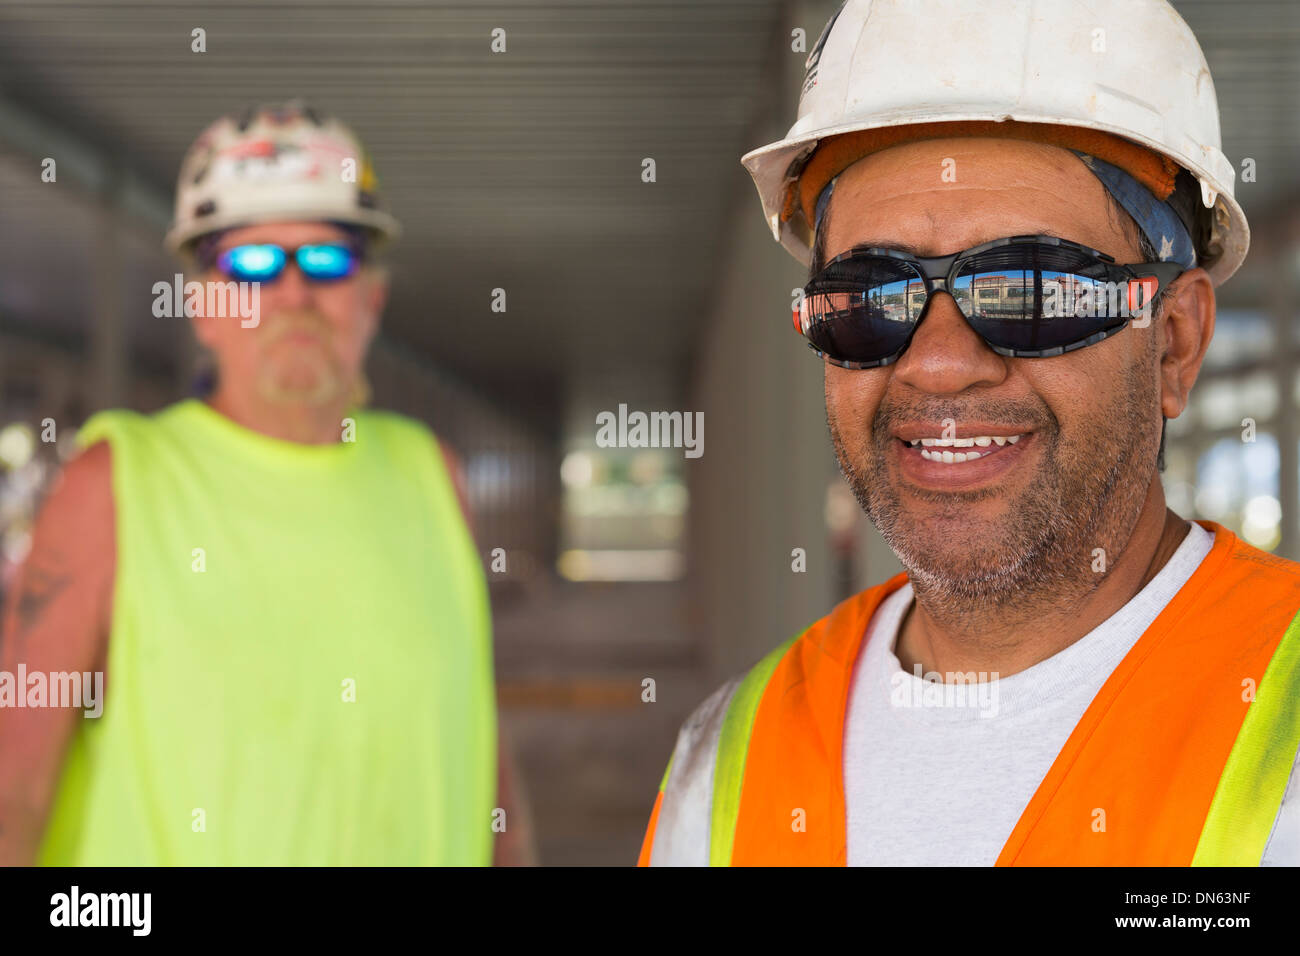 Workers smiling at construction site Banque D'Images